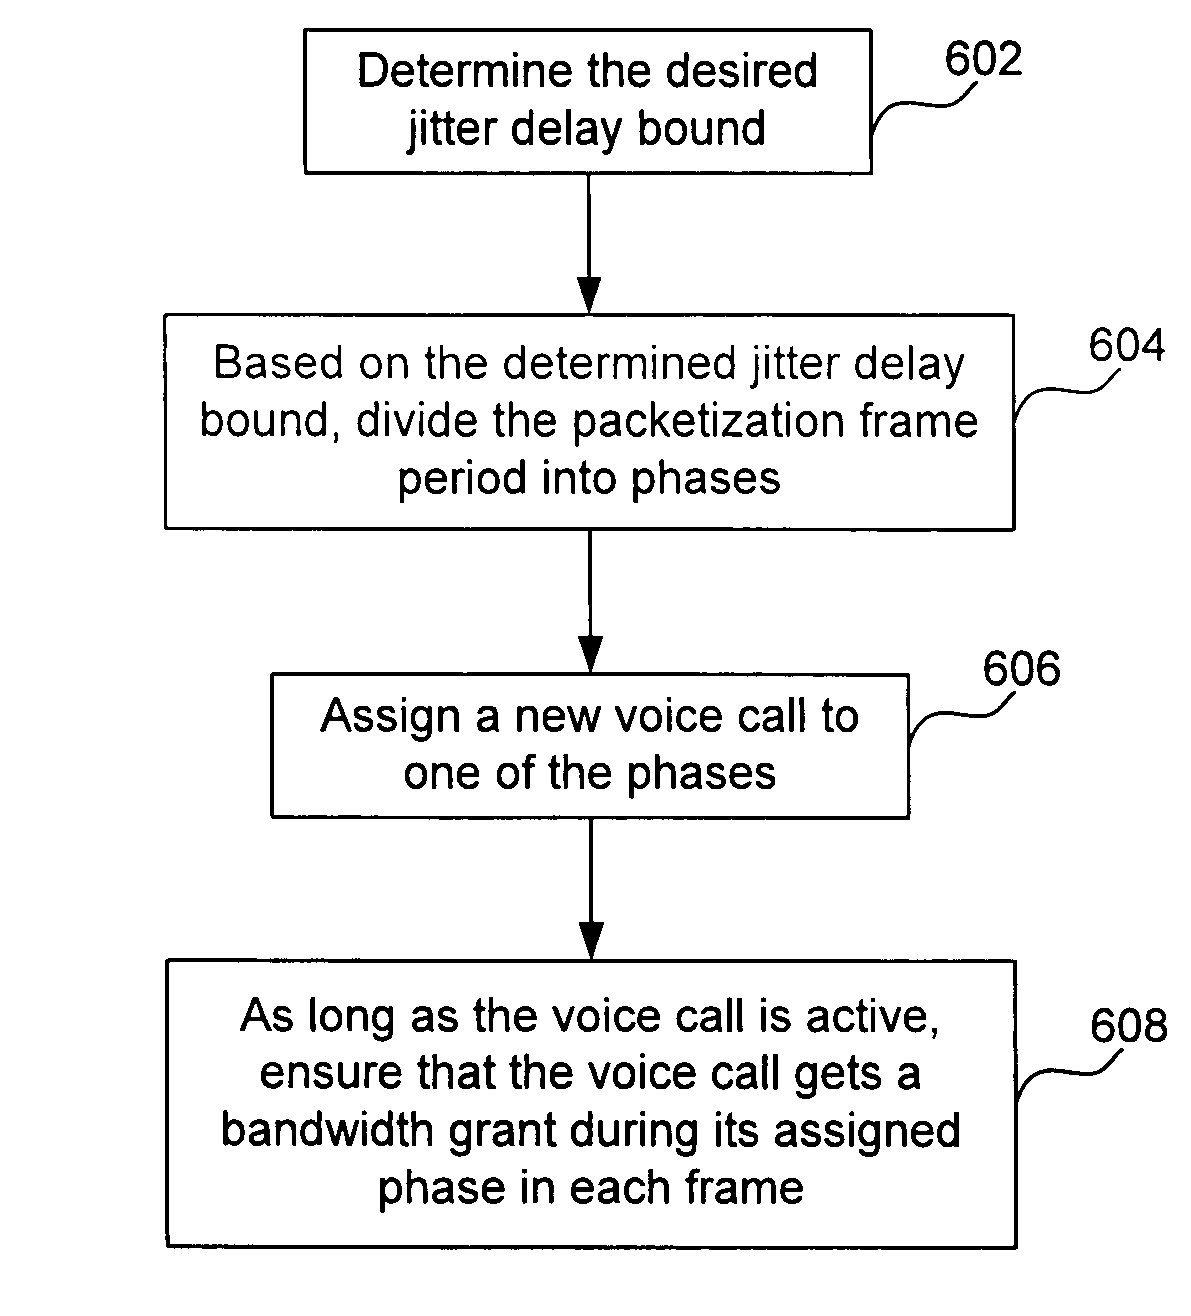 System and method for a guaranteed delay jitter bound when scheduling bandwidth grants for voice calls via cable network